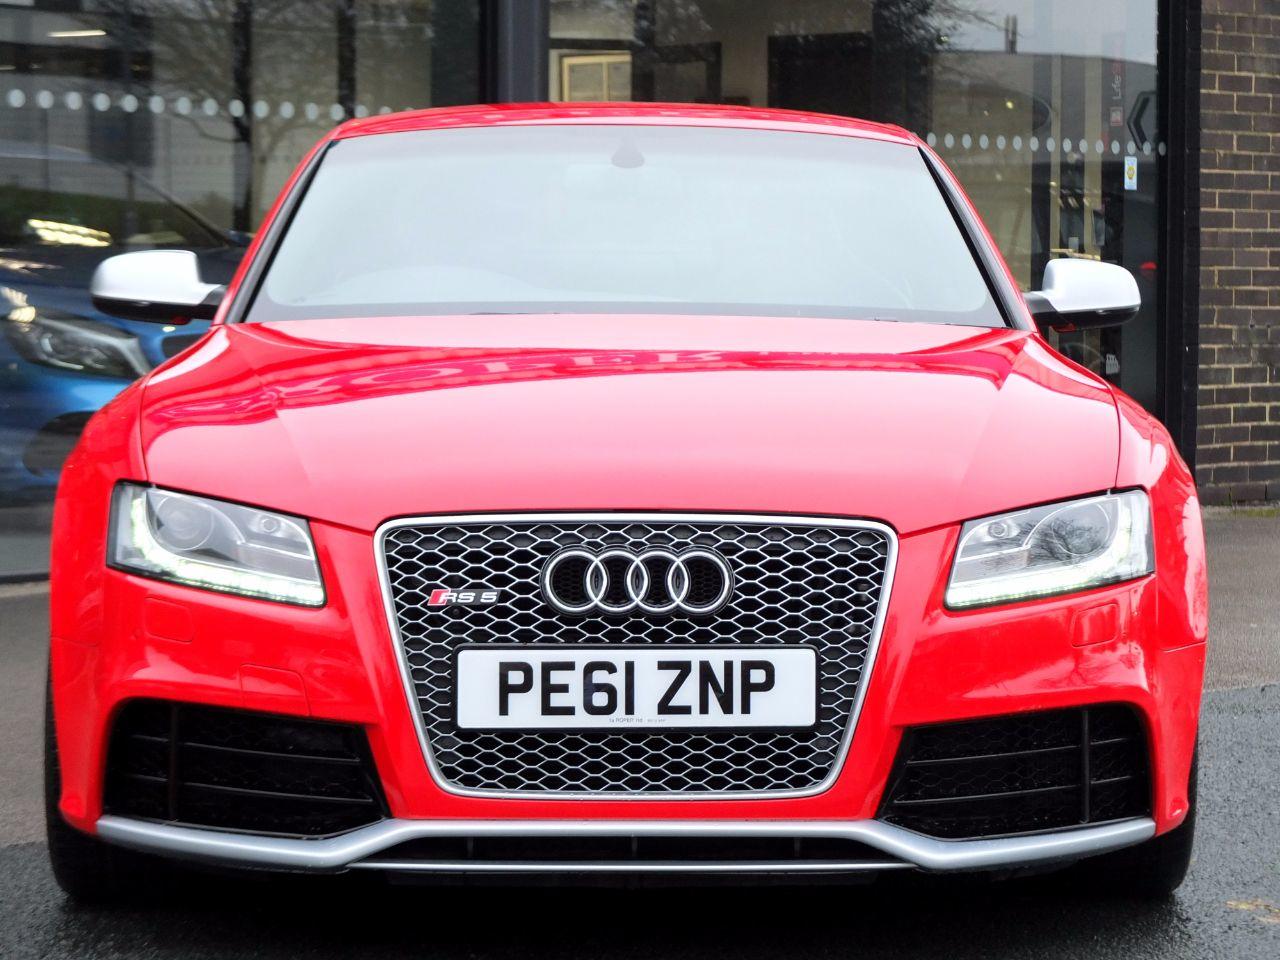 Audi RS5 4.2 FSI quattro (Bucket Seats, Miltek Exhaust, Tech Pack) Coupe Petrol Misano Red Pearl